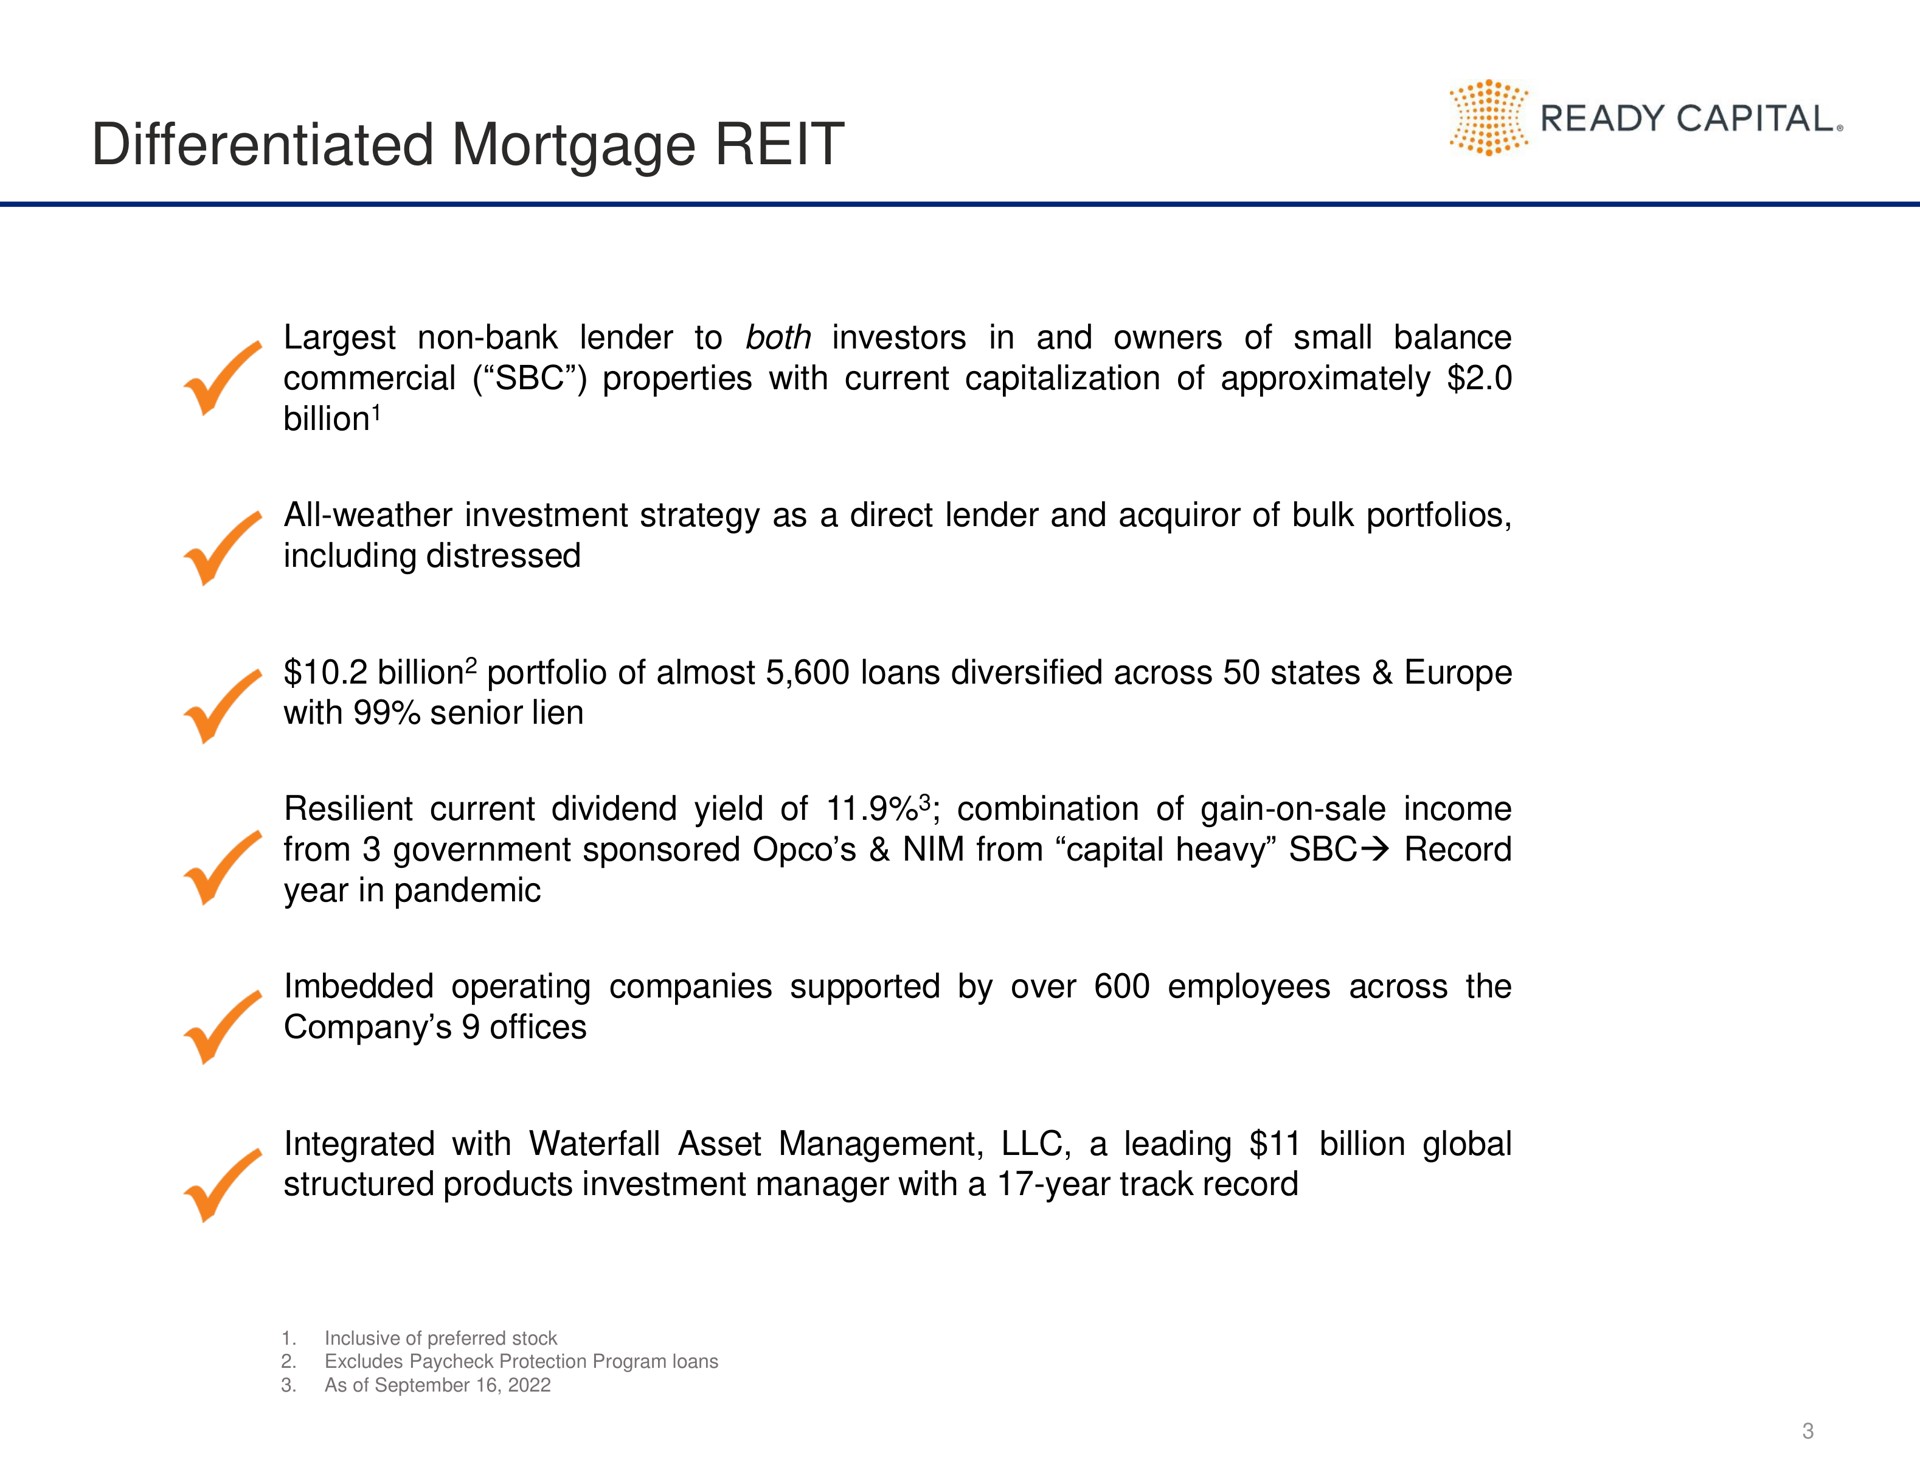 differentiated mortgage reit ready capital | Ready Capital